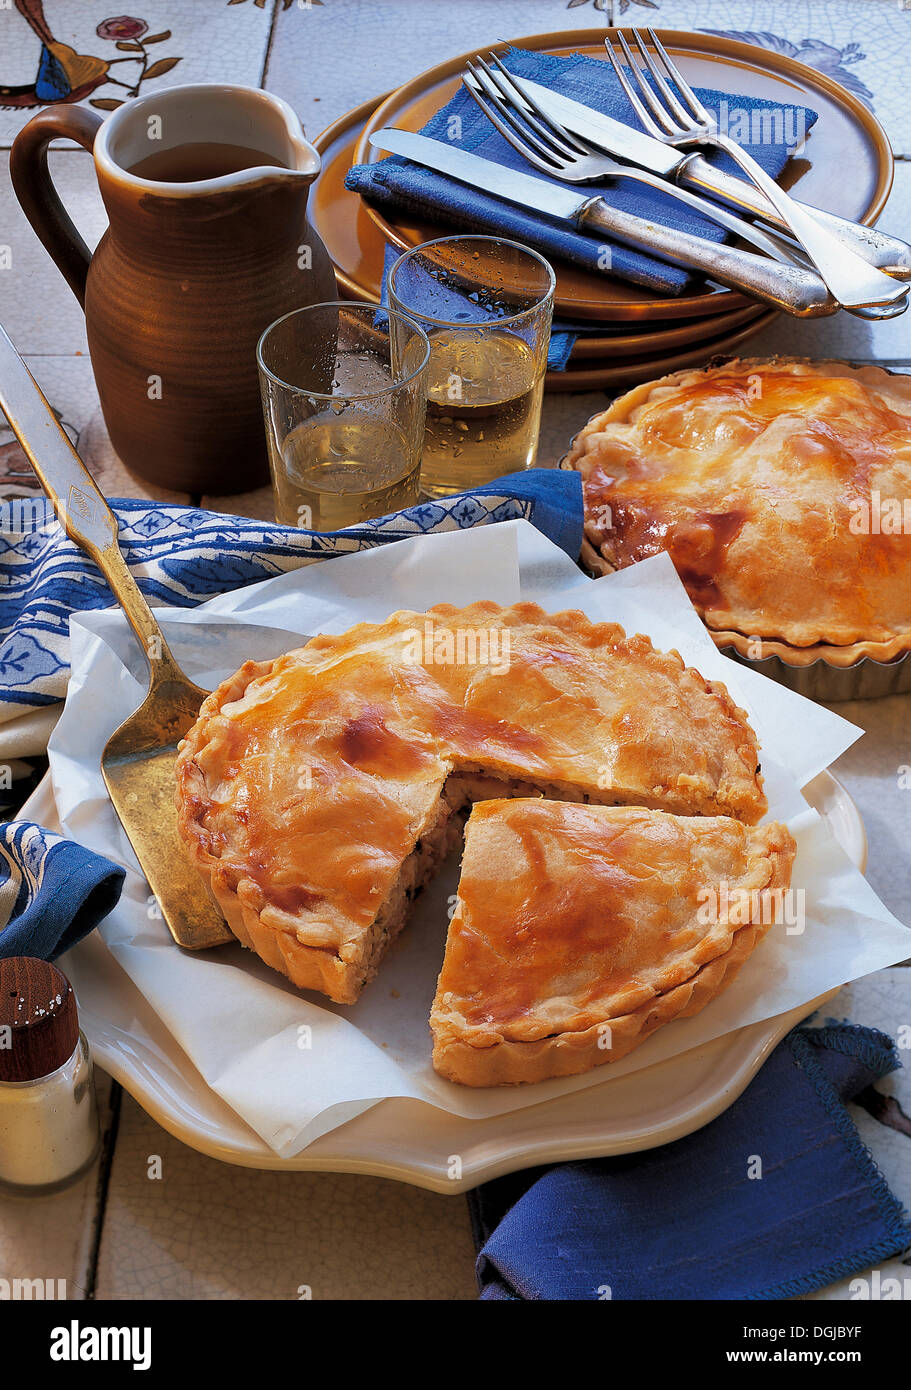 Delicious chicken pastries, France. Stock Photo